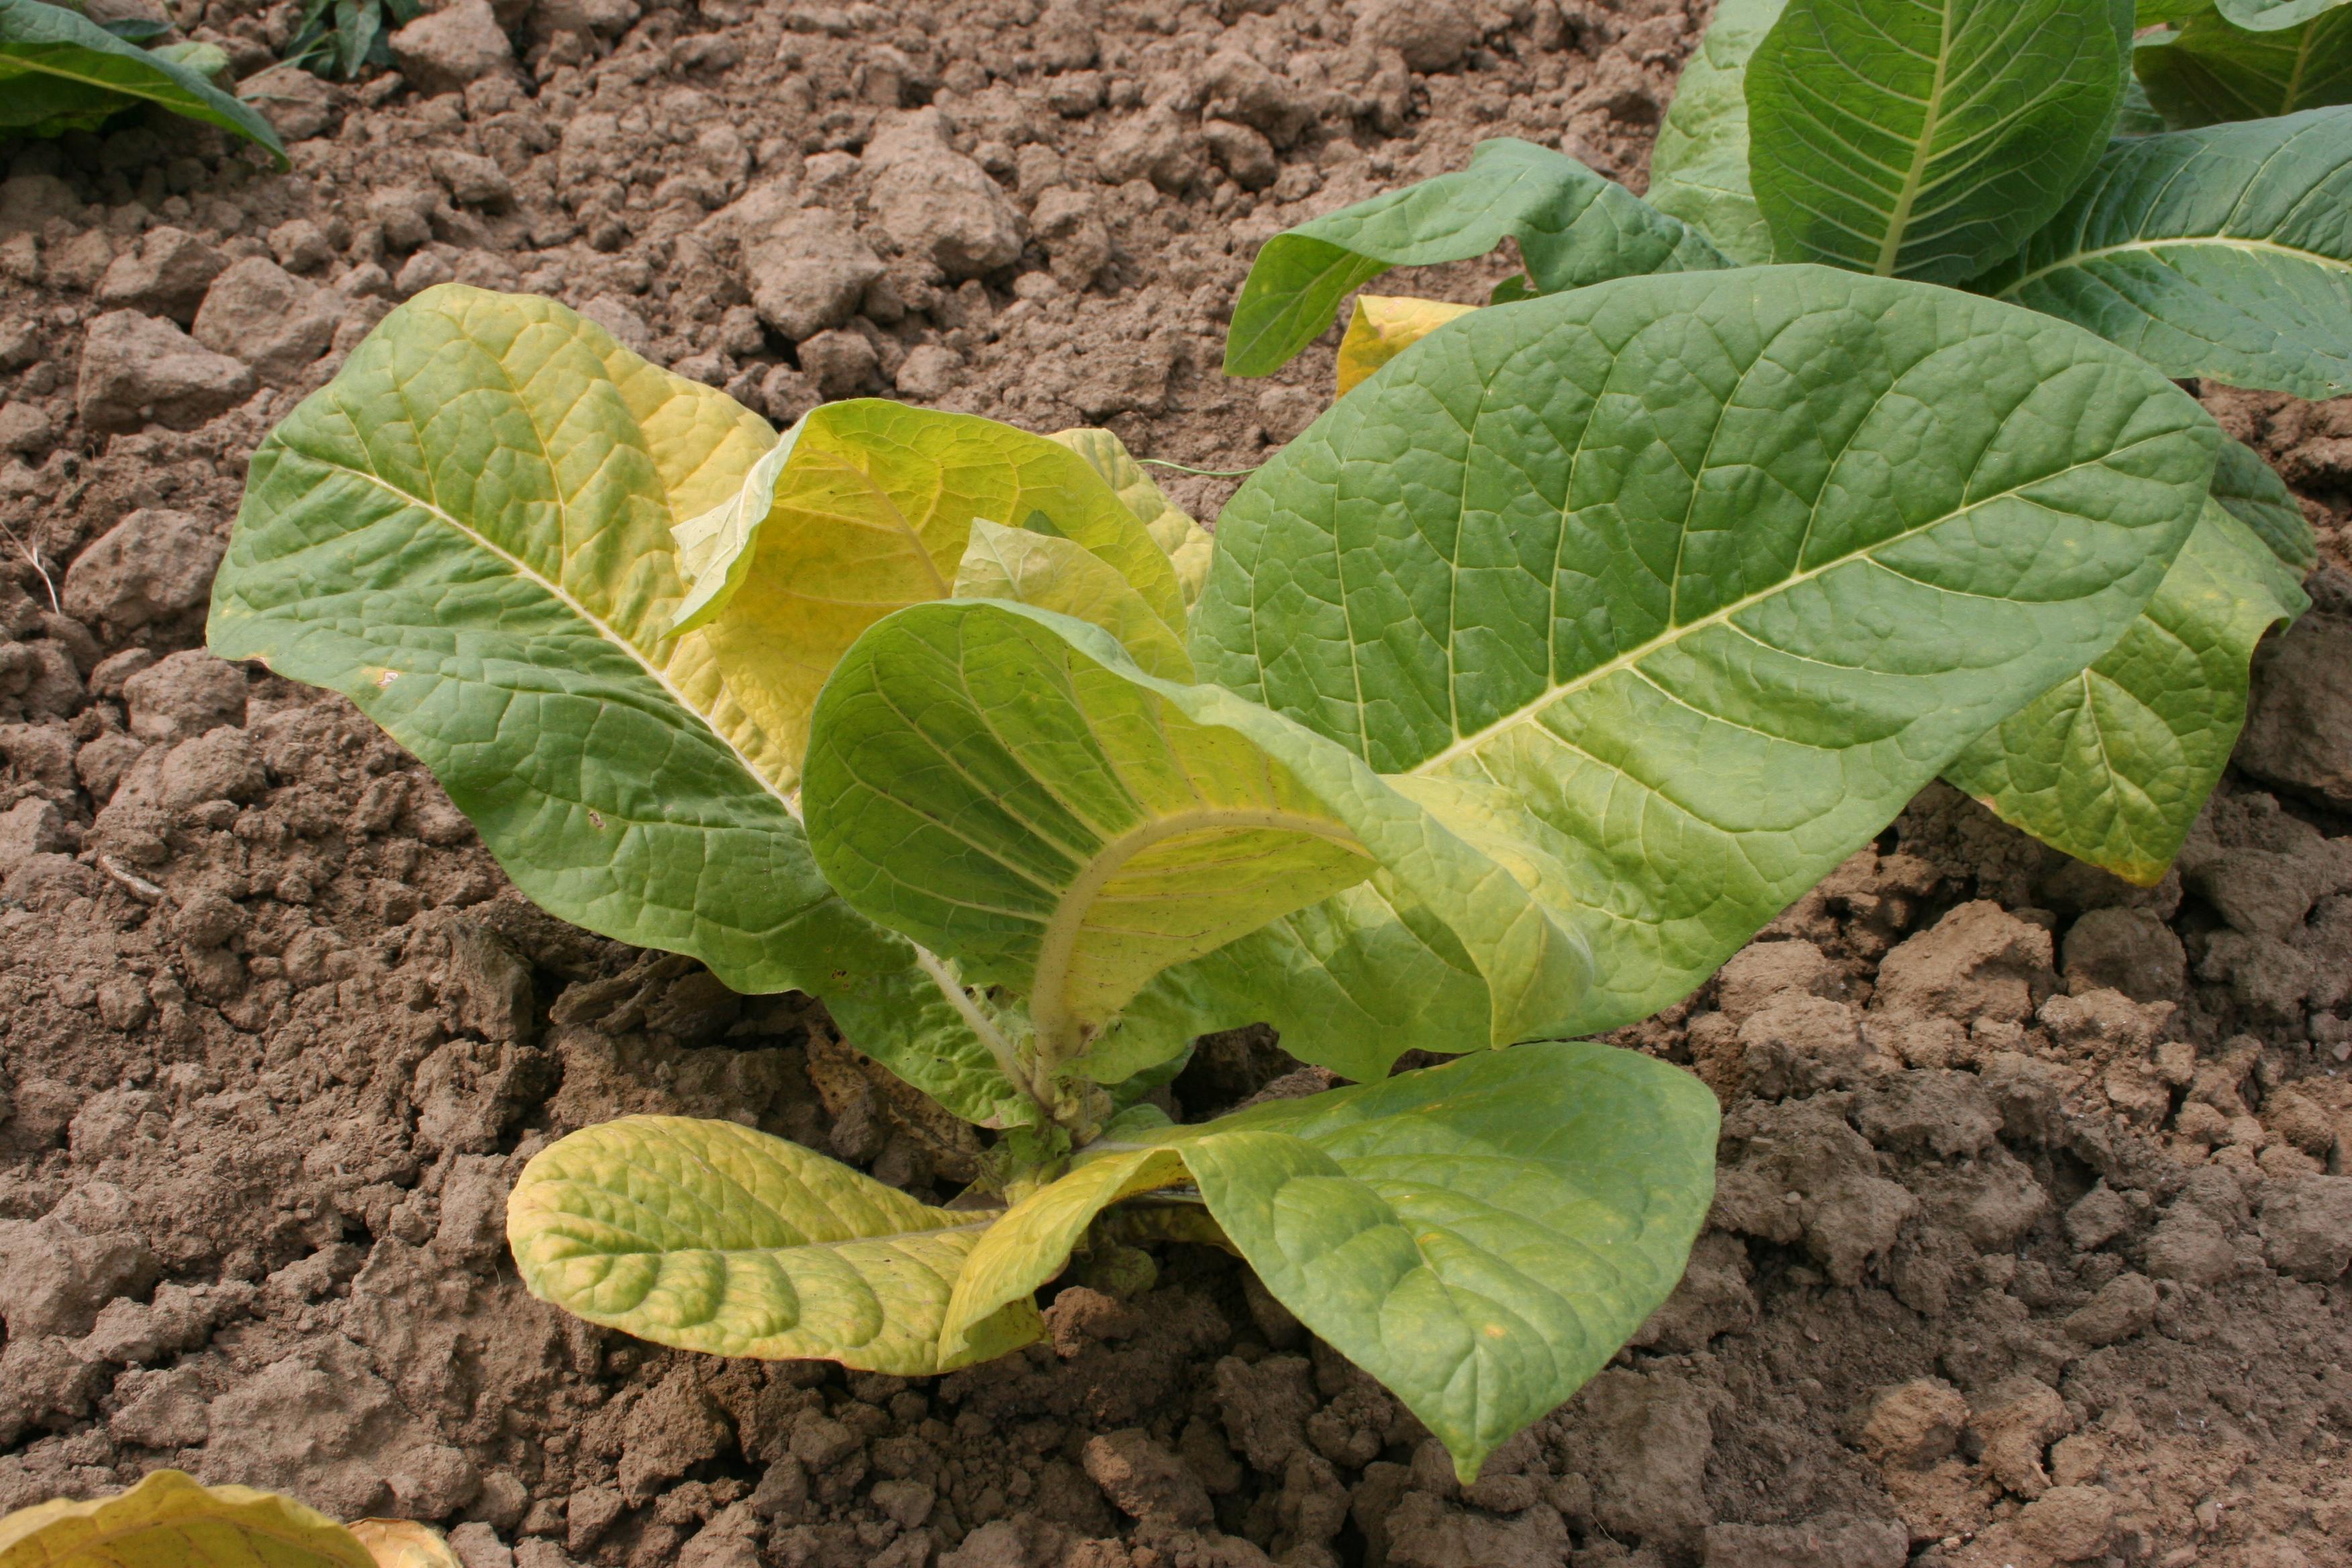 Fusarium wilt generally affects one side of a tobacco plant.  Leaves on the affected side are often curved to one side, with half the leaf yellowed and the other half remaining green. (Photo: Kenneth Seebold, UK)